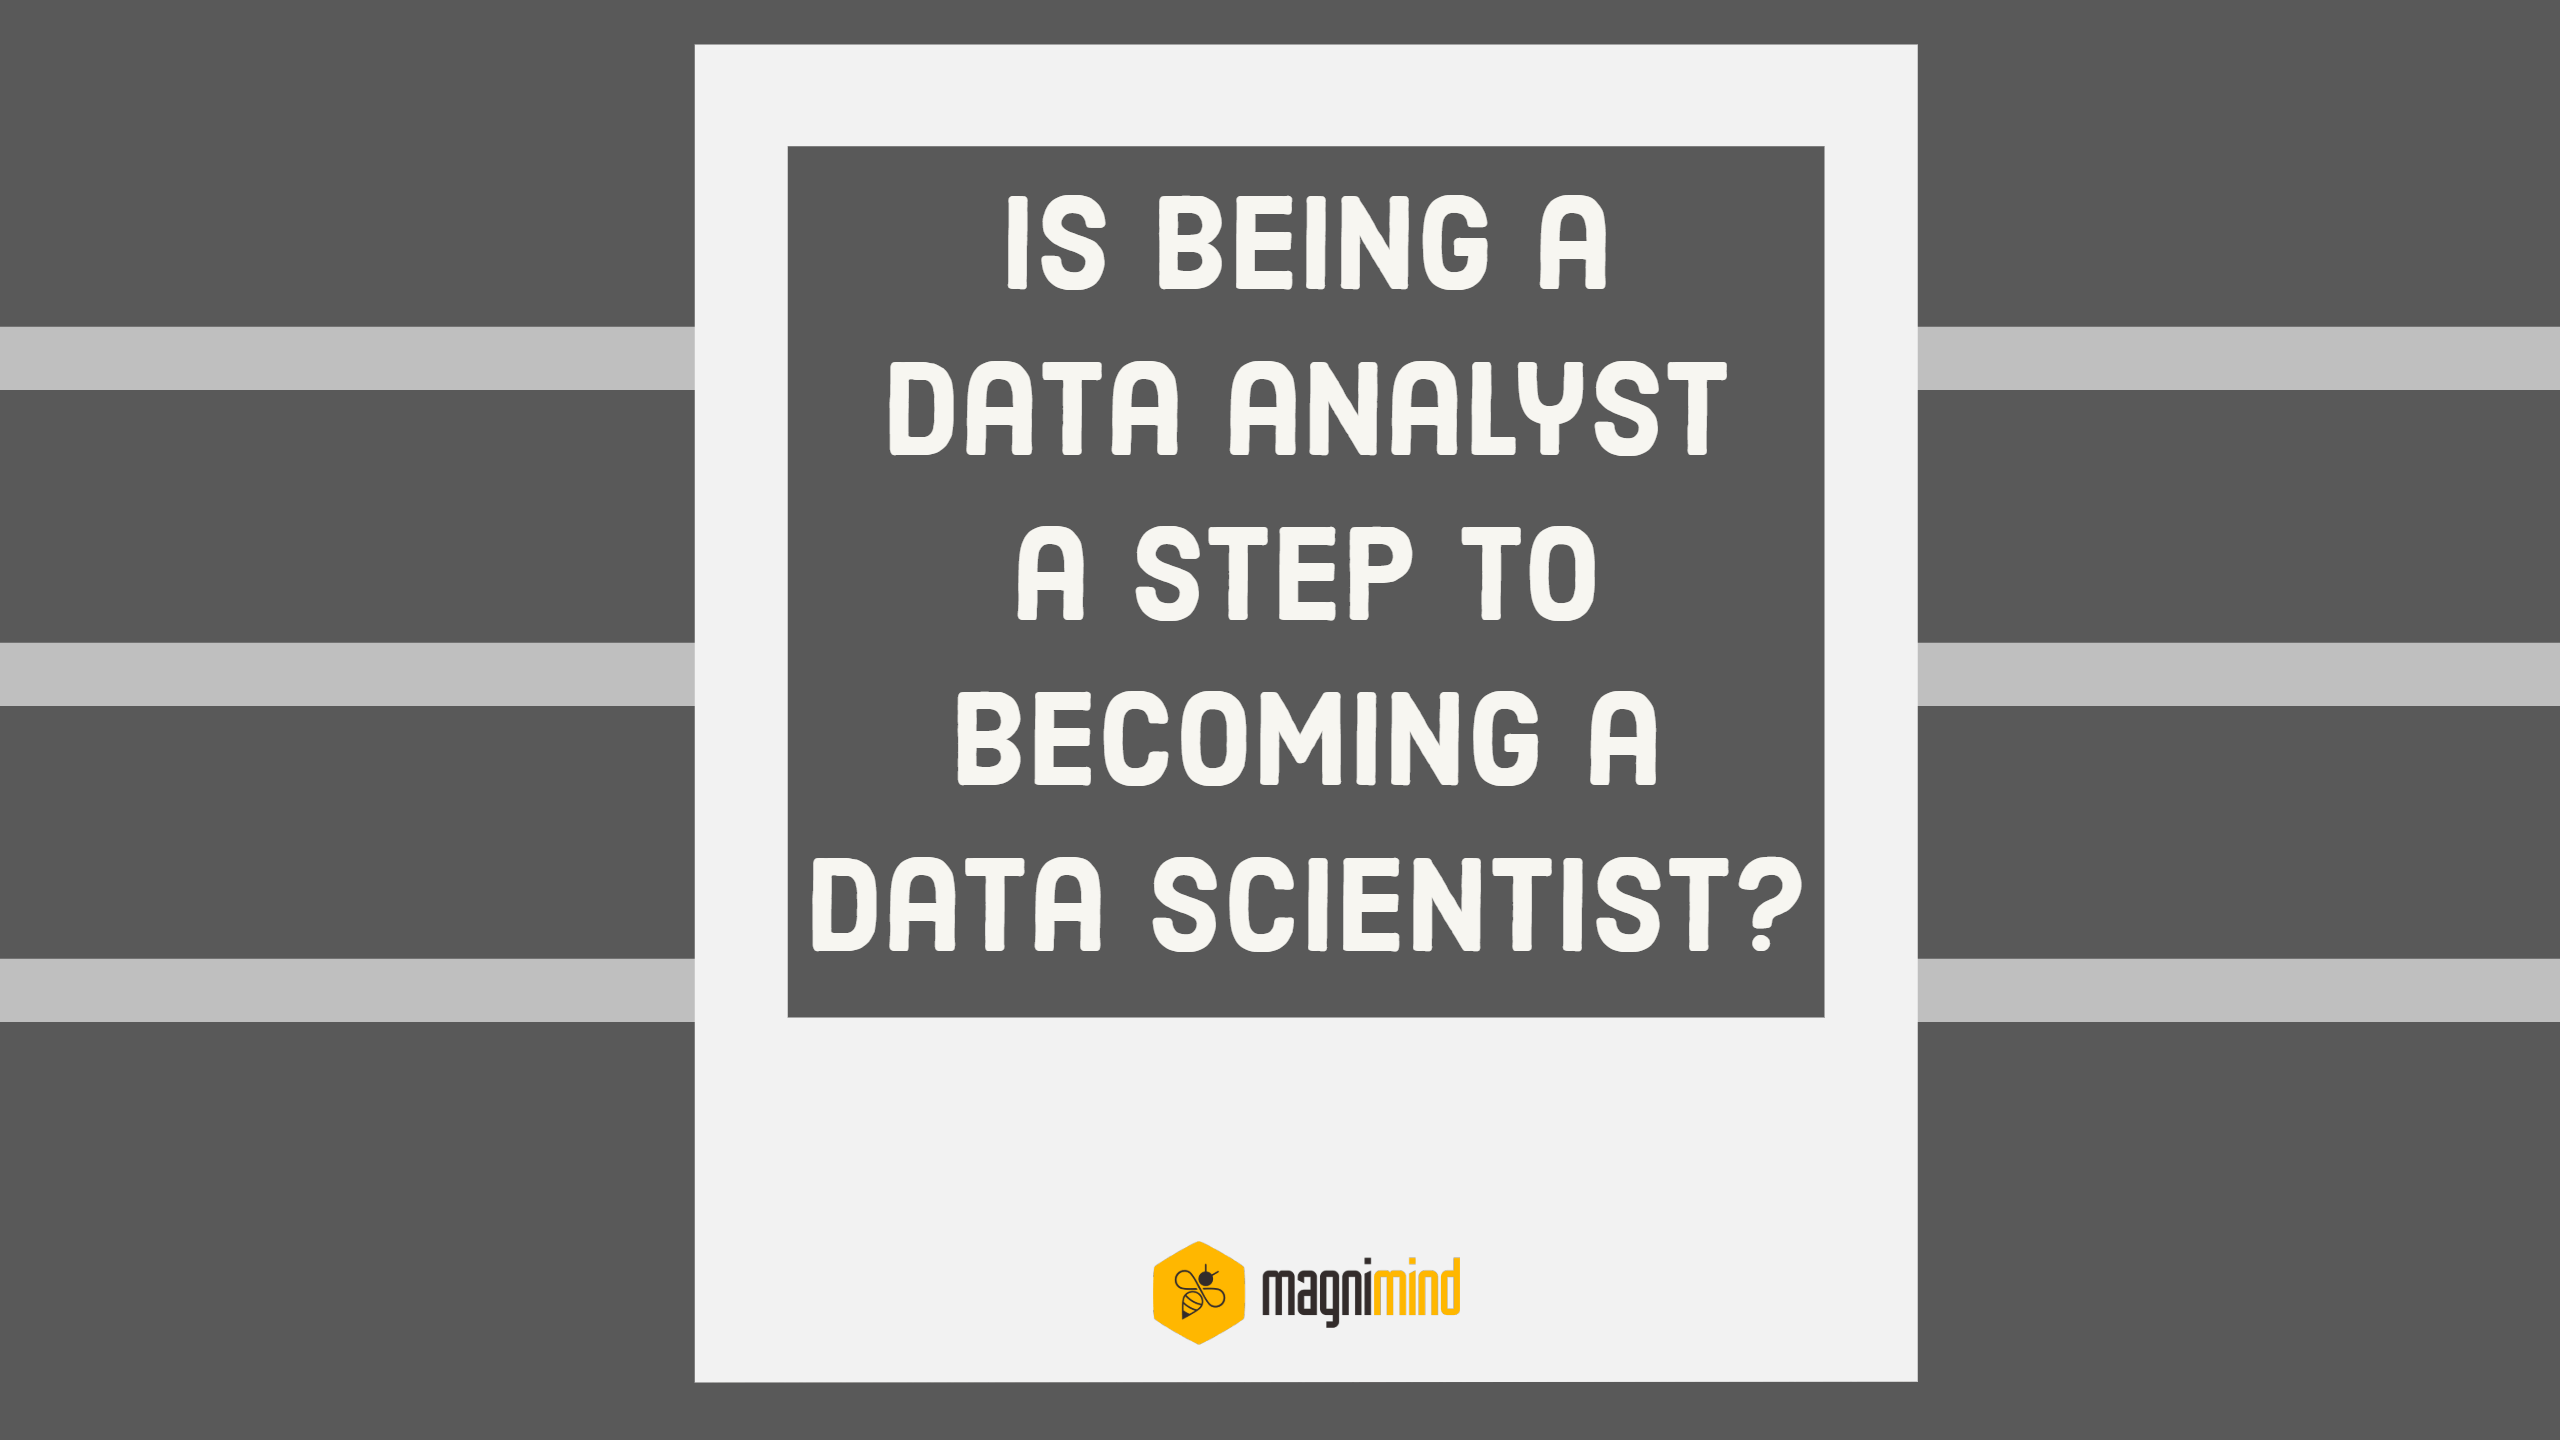 Is Being A Data Analyst A Step To Becoming A Data Scientist